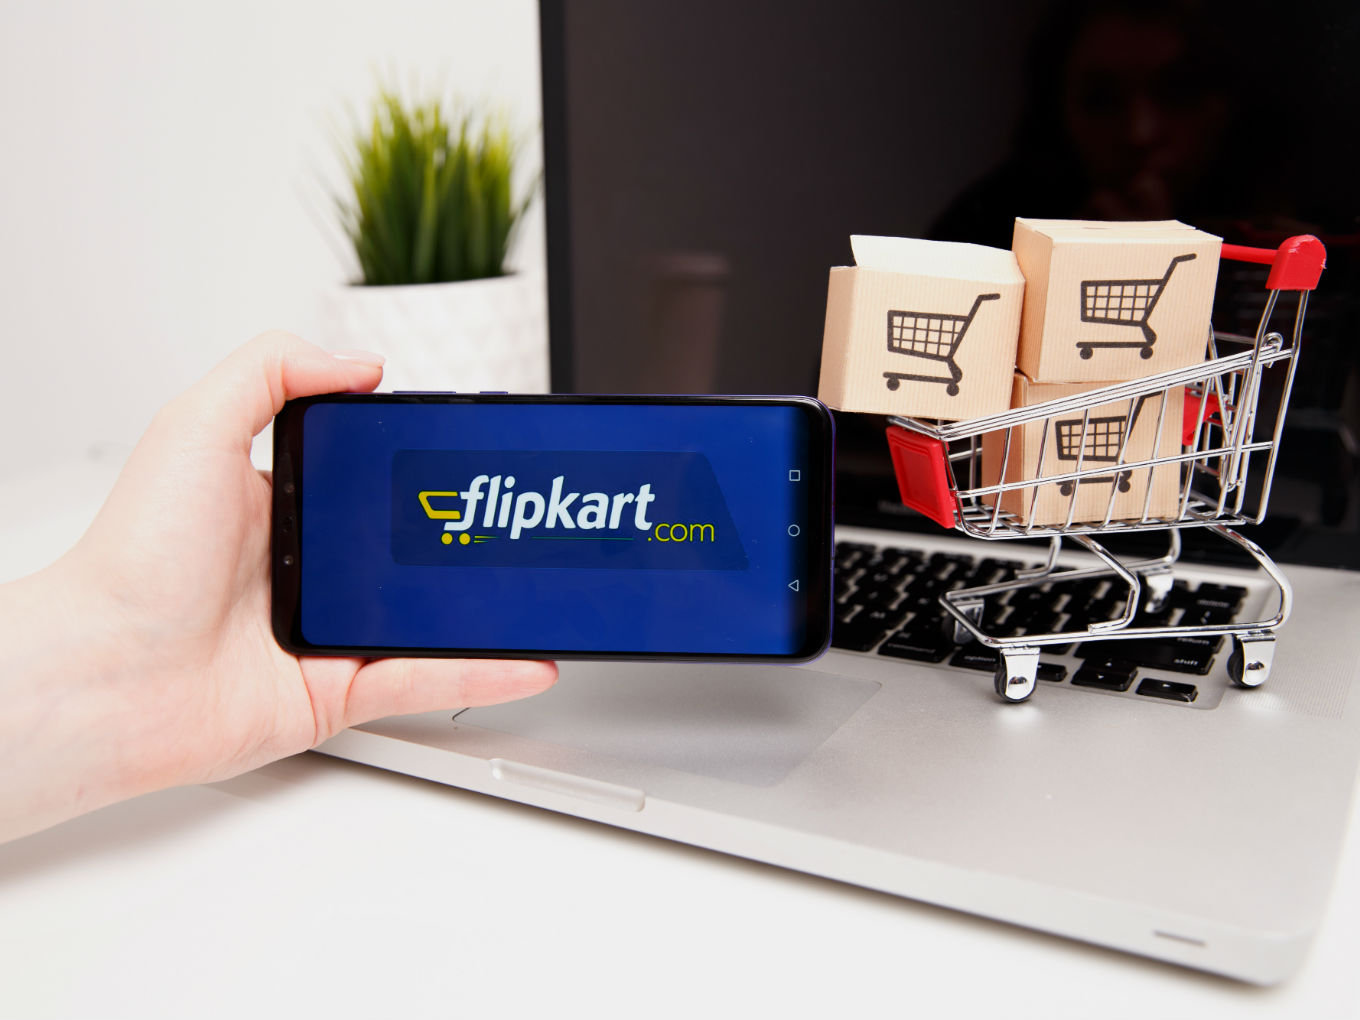 Flipkart Employees Can Now Cash Out 10% Of ESOPs